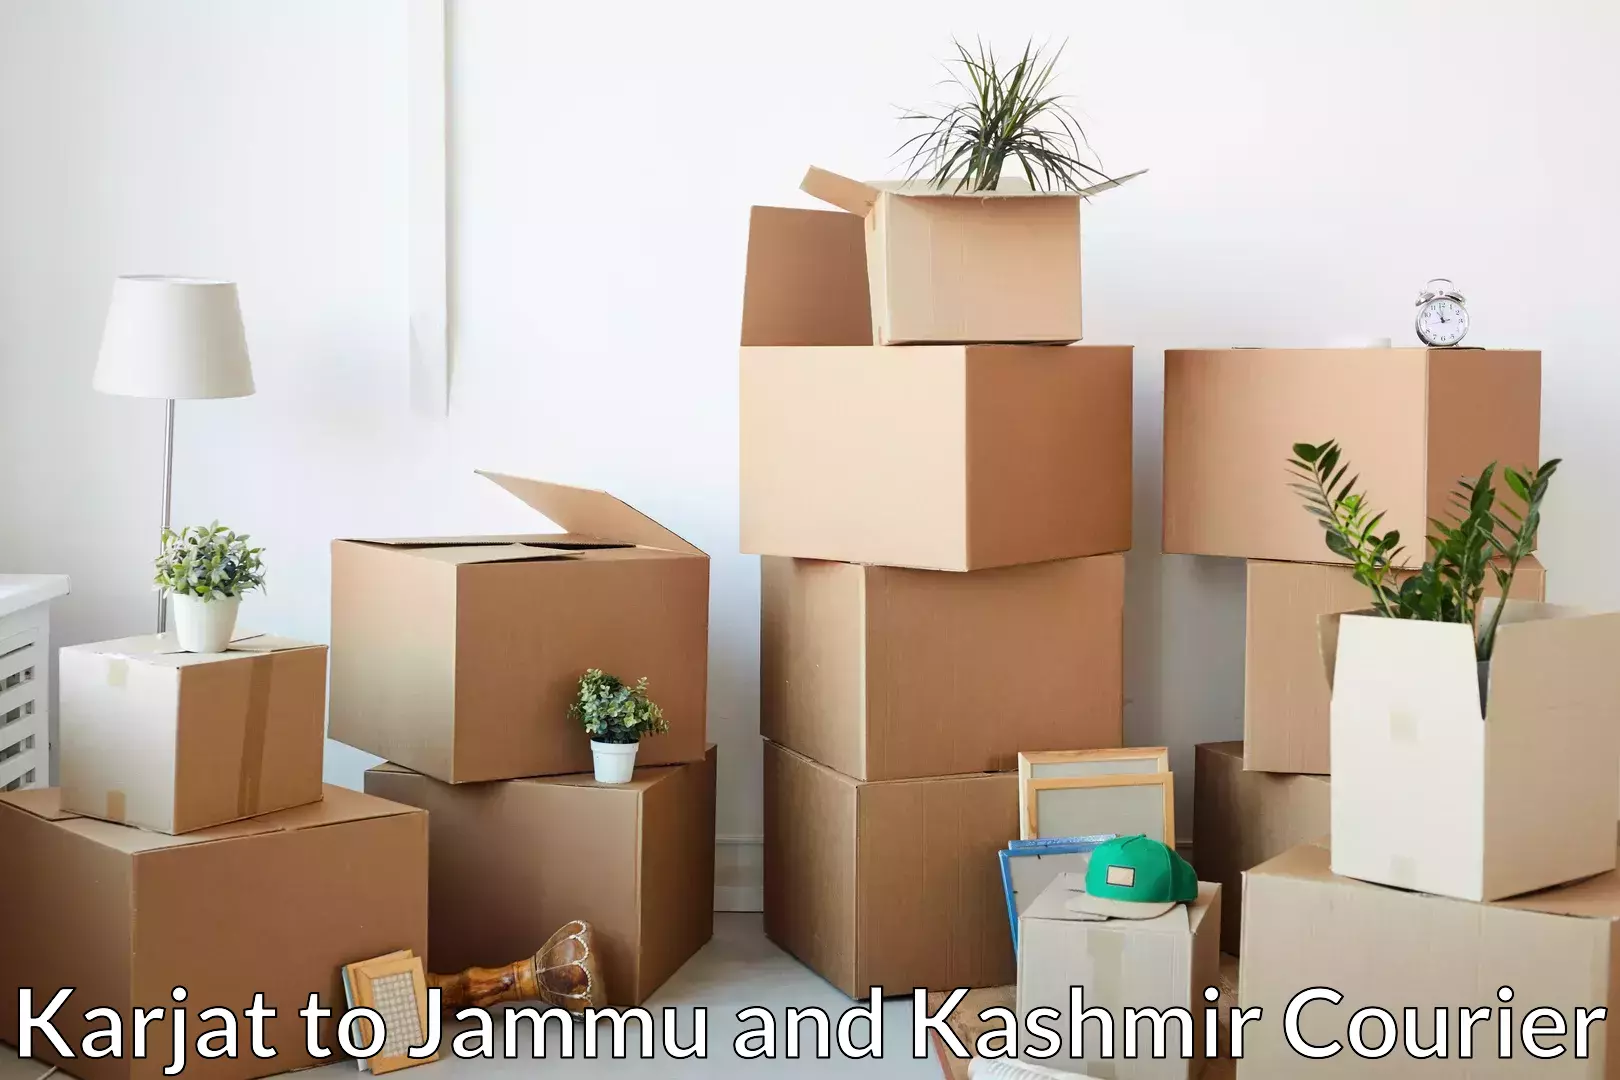 Hassle-free relocation Karjat to Anantnag